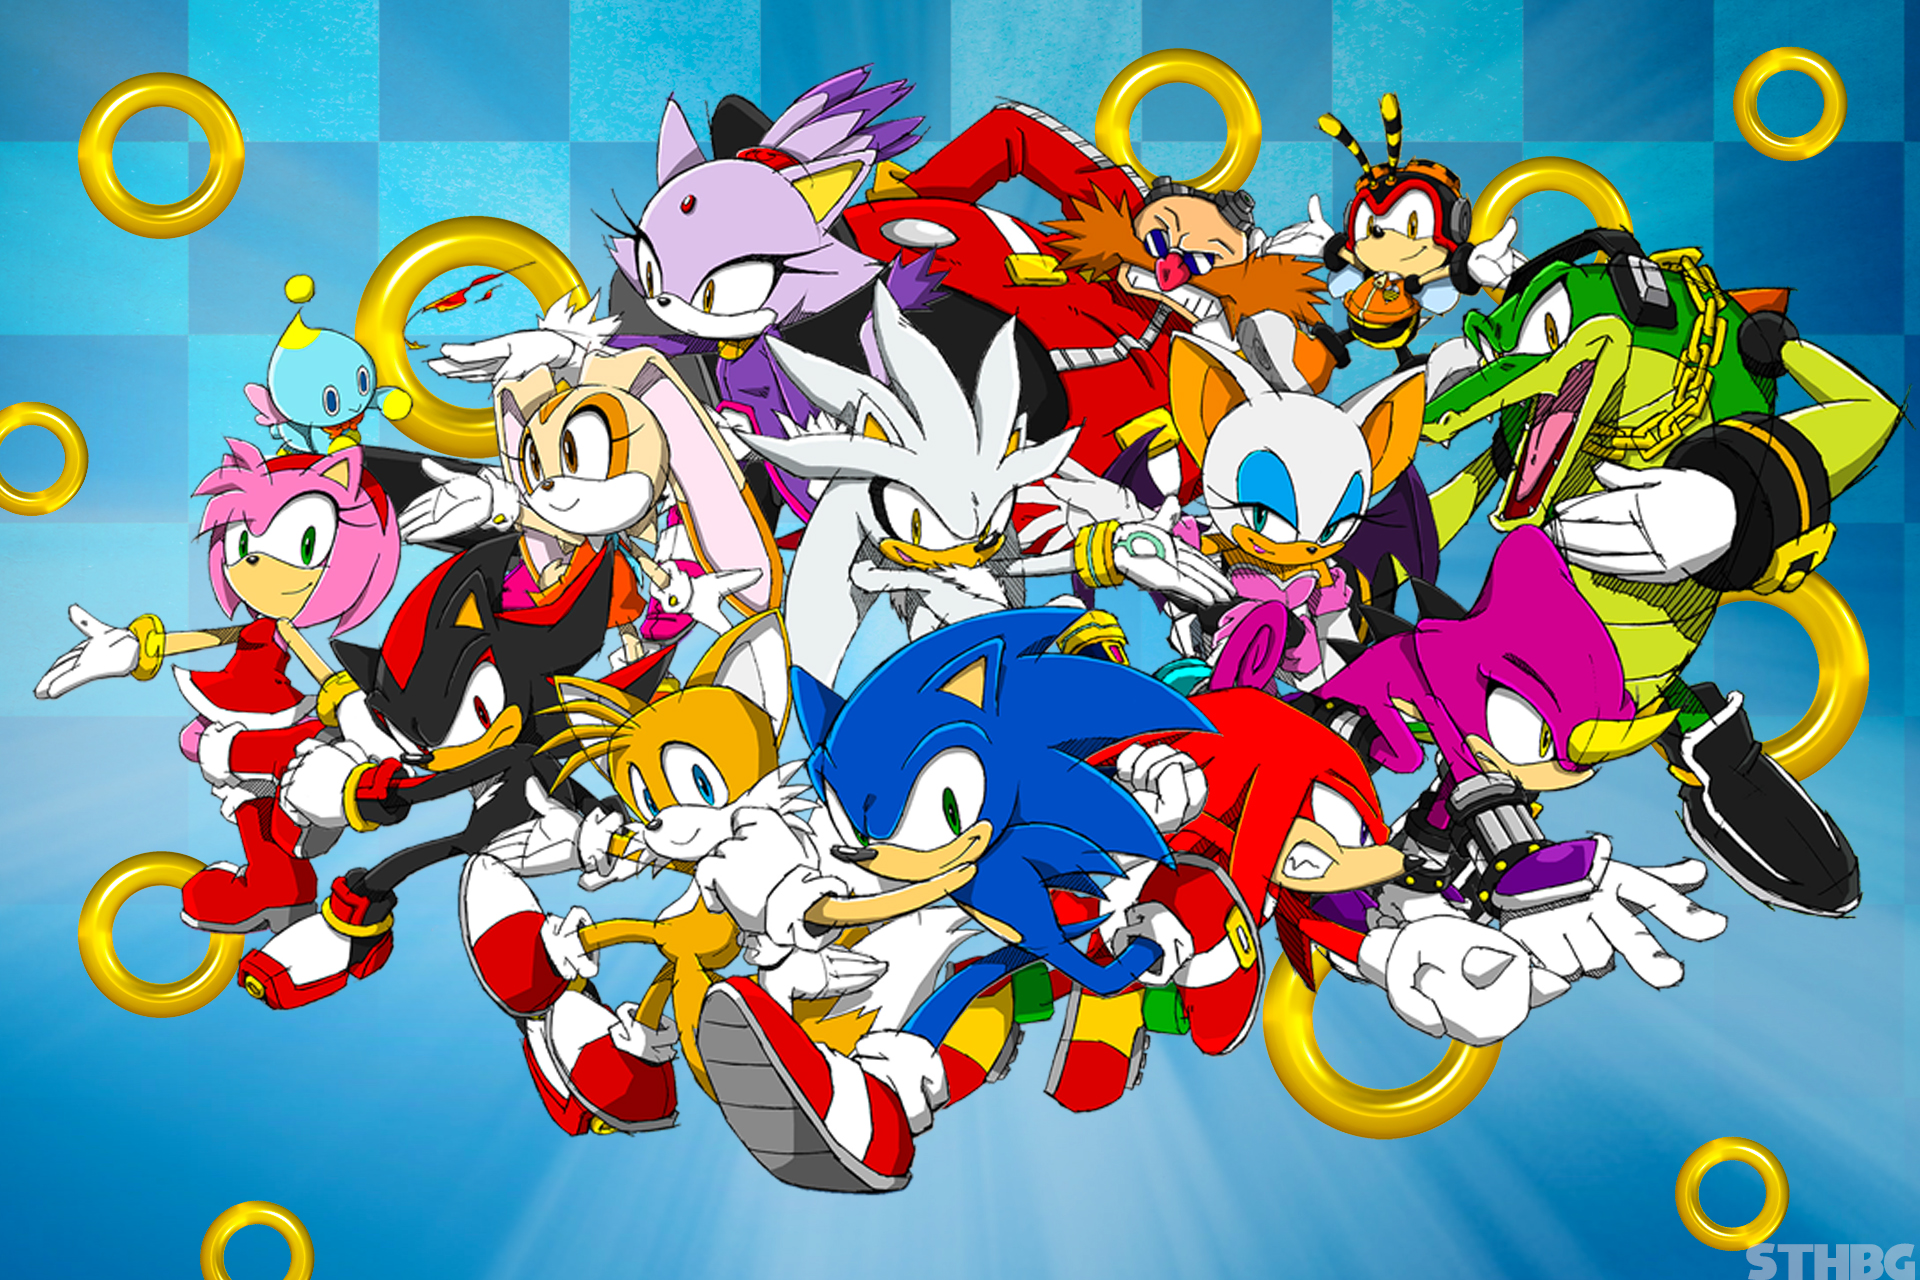 Sonic The Hedgehog And Friends Wallpaper by SonicTheHedgehogBG on